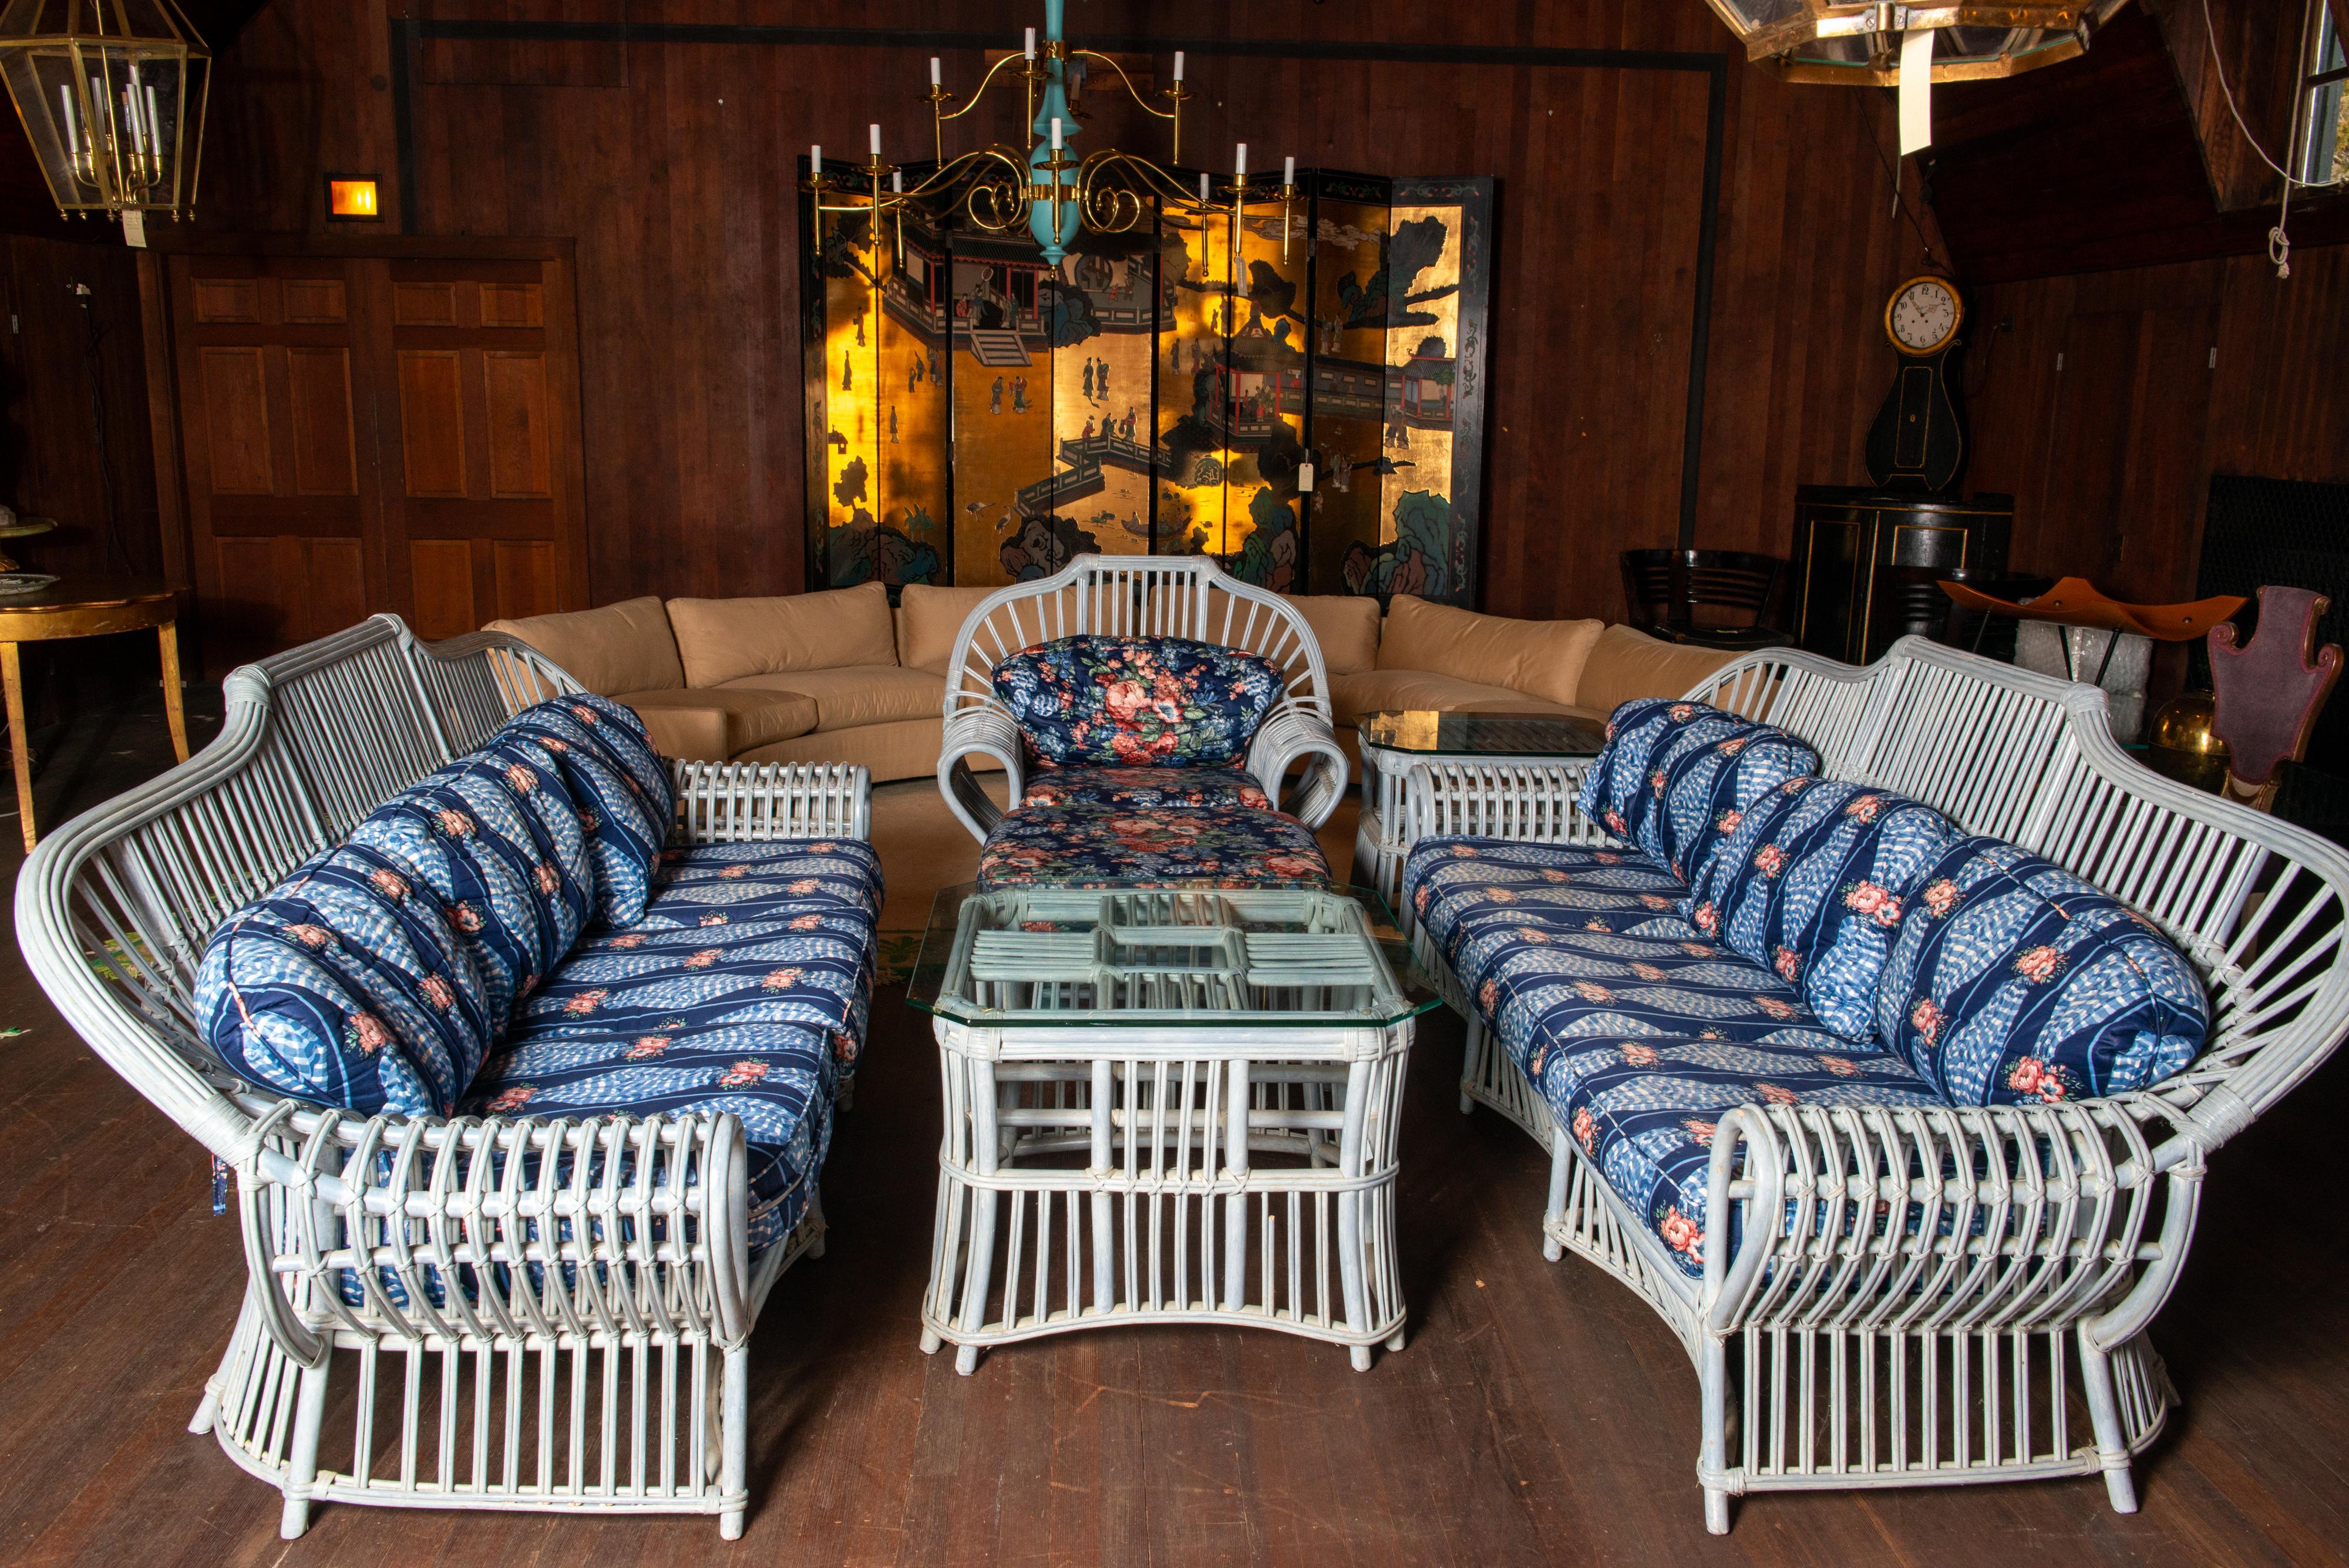 A spectacular pair of Ficks Reed rattan sofas in an original factory finish: a pale blue wash. Original cushions to use or for reupholstery. All cushions and rattan pieces are in great condition. 
Included are an arm chair with ottoman, a glass top